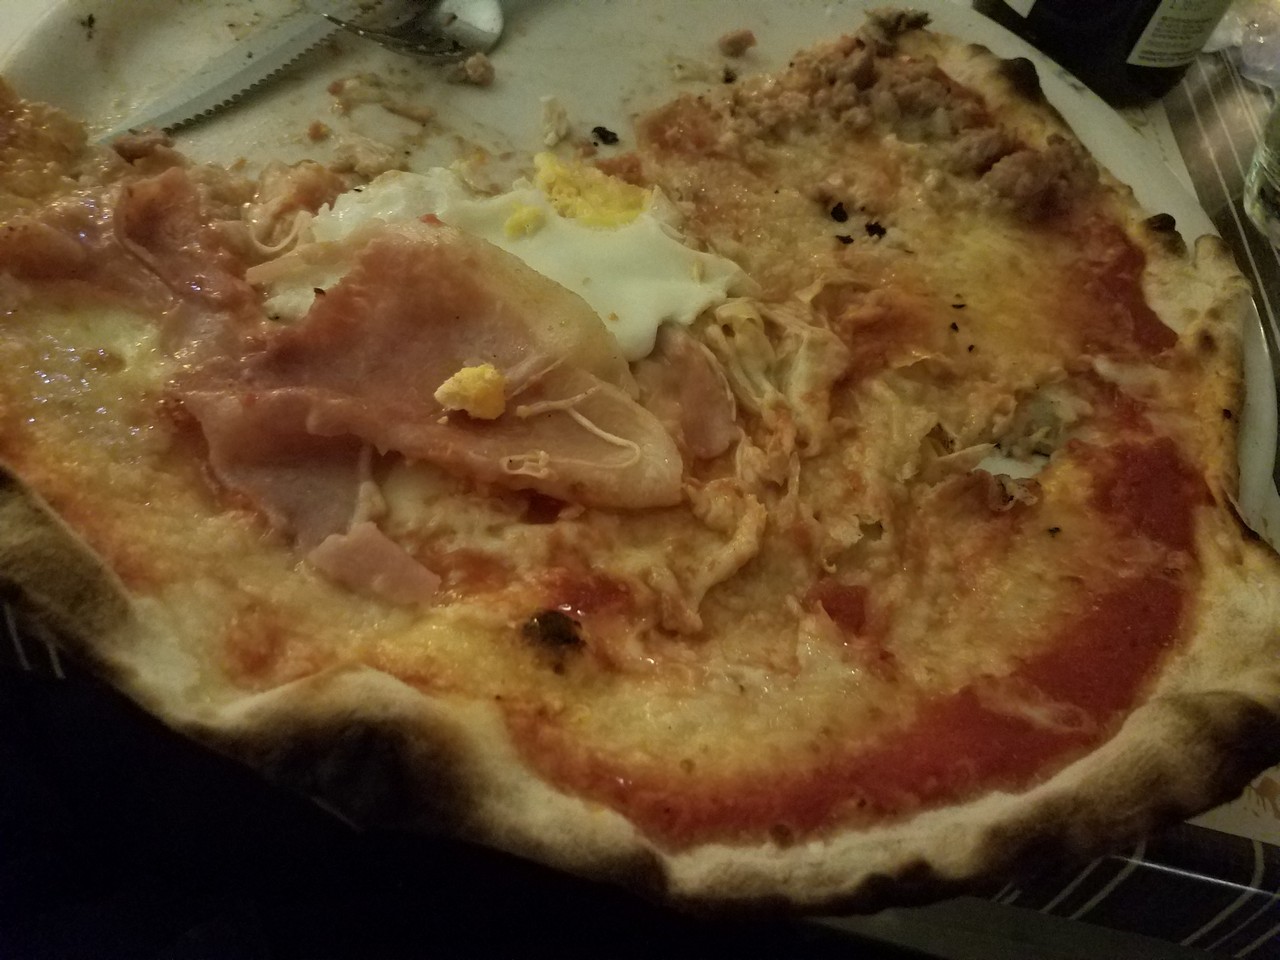 a pizza with a broken egg and ham on it